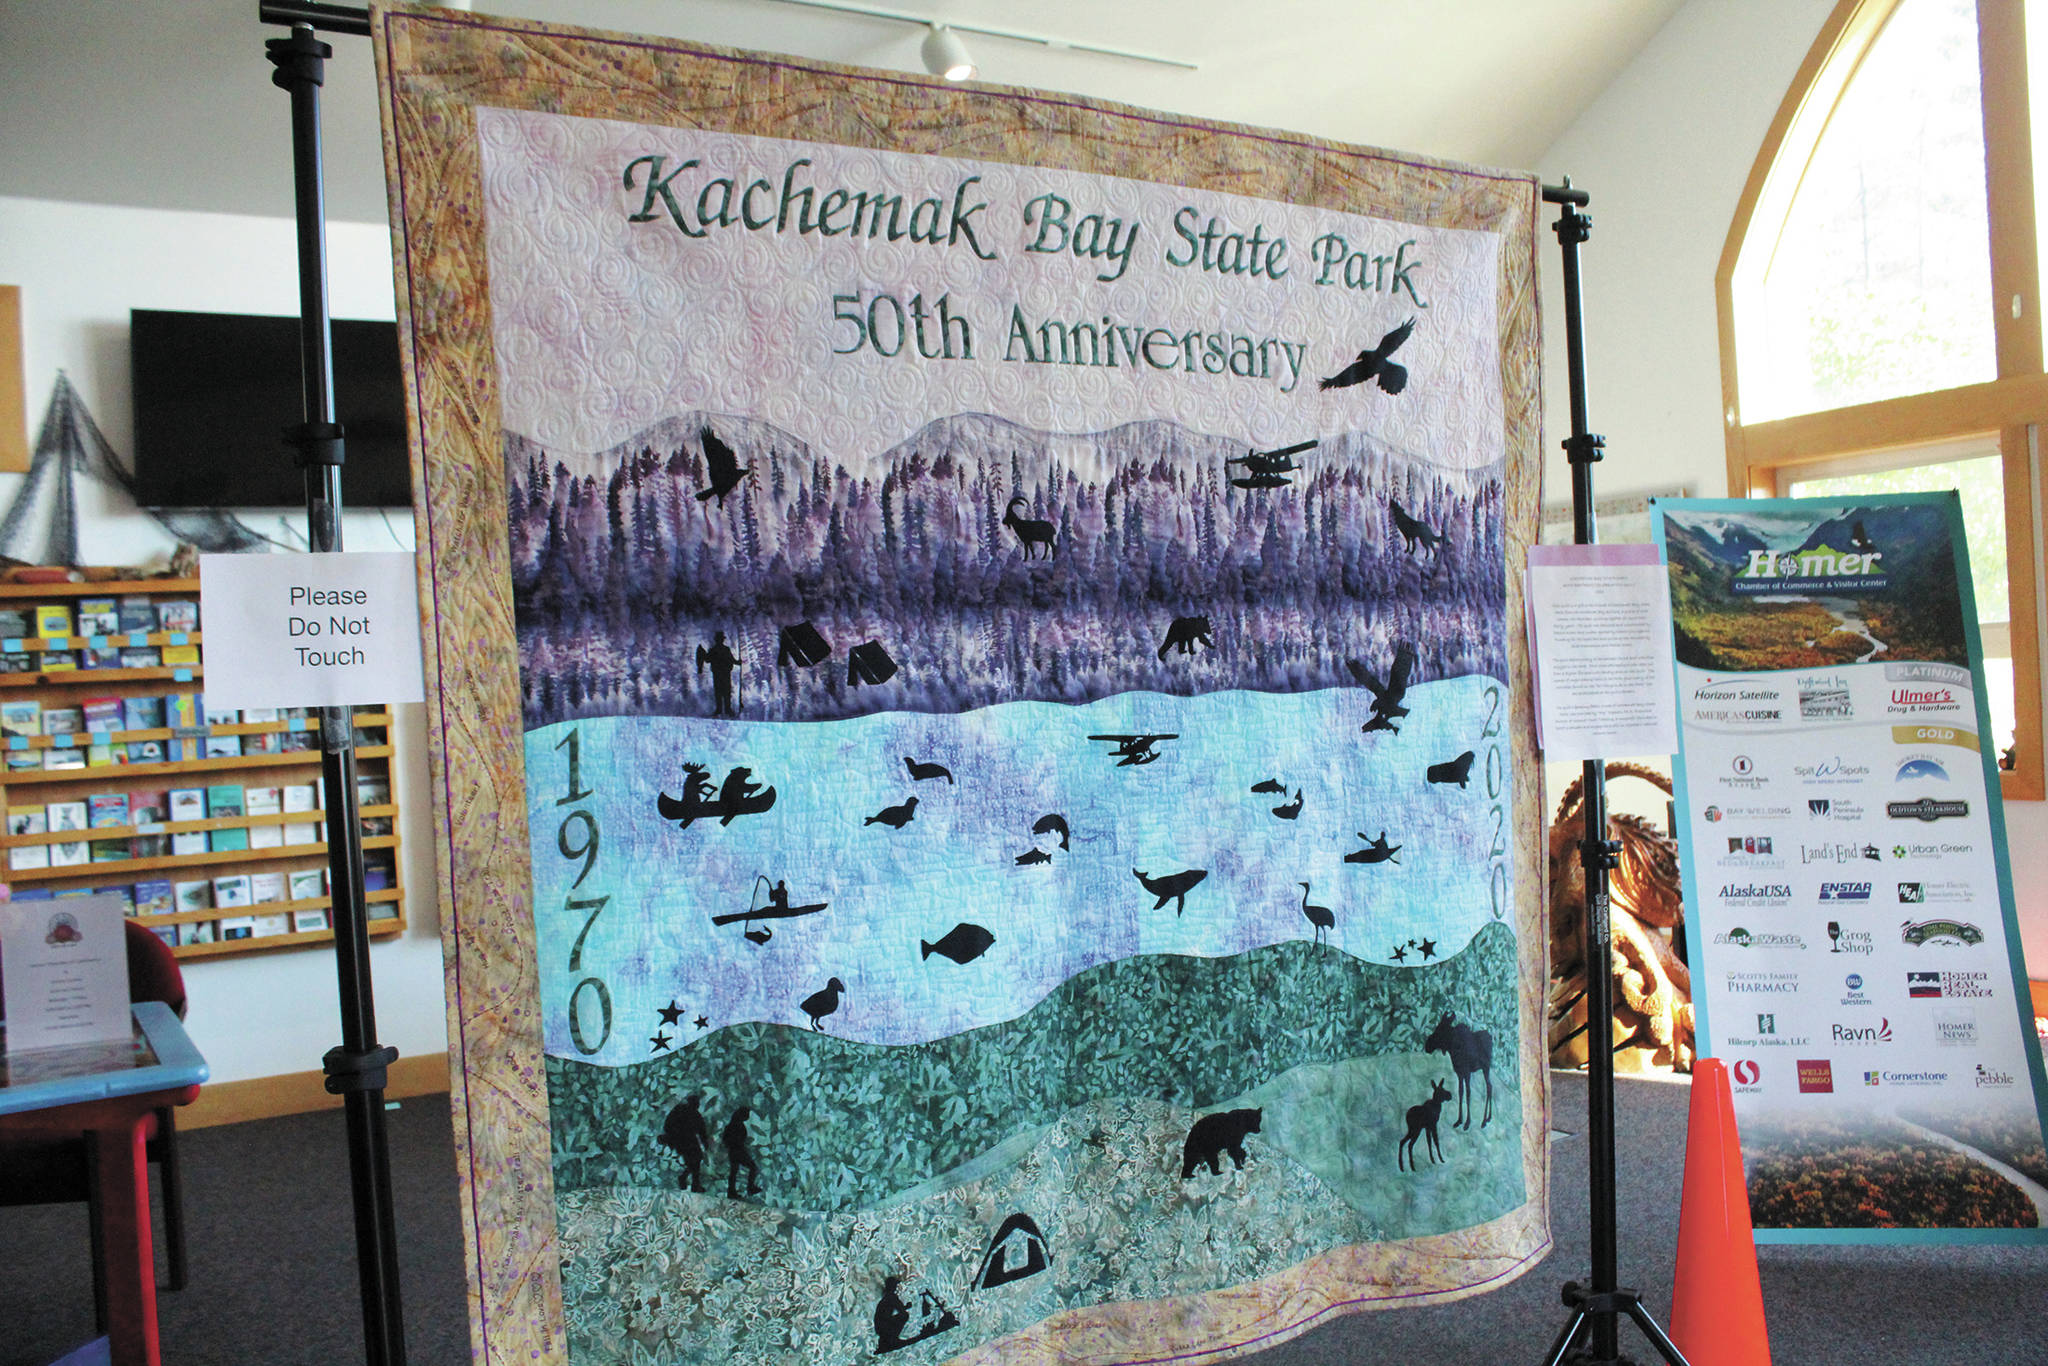 A commemorative quilt made by members of the Kachemak Bay Quilters to celebrate the 50th anniversary of Kachemak Bay State Park hangs in the at the Homer Chamber of Commerce & Visitor Center during a celebration of the park on Saturday, June 6, 2020 in Homer, Alaska. (Photo by Megan Pacer/Homer News)